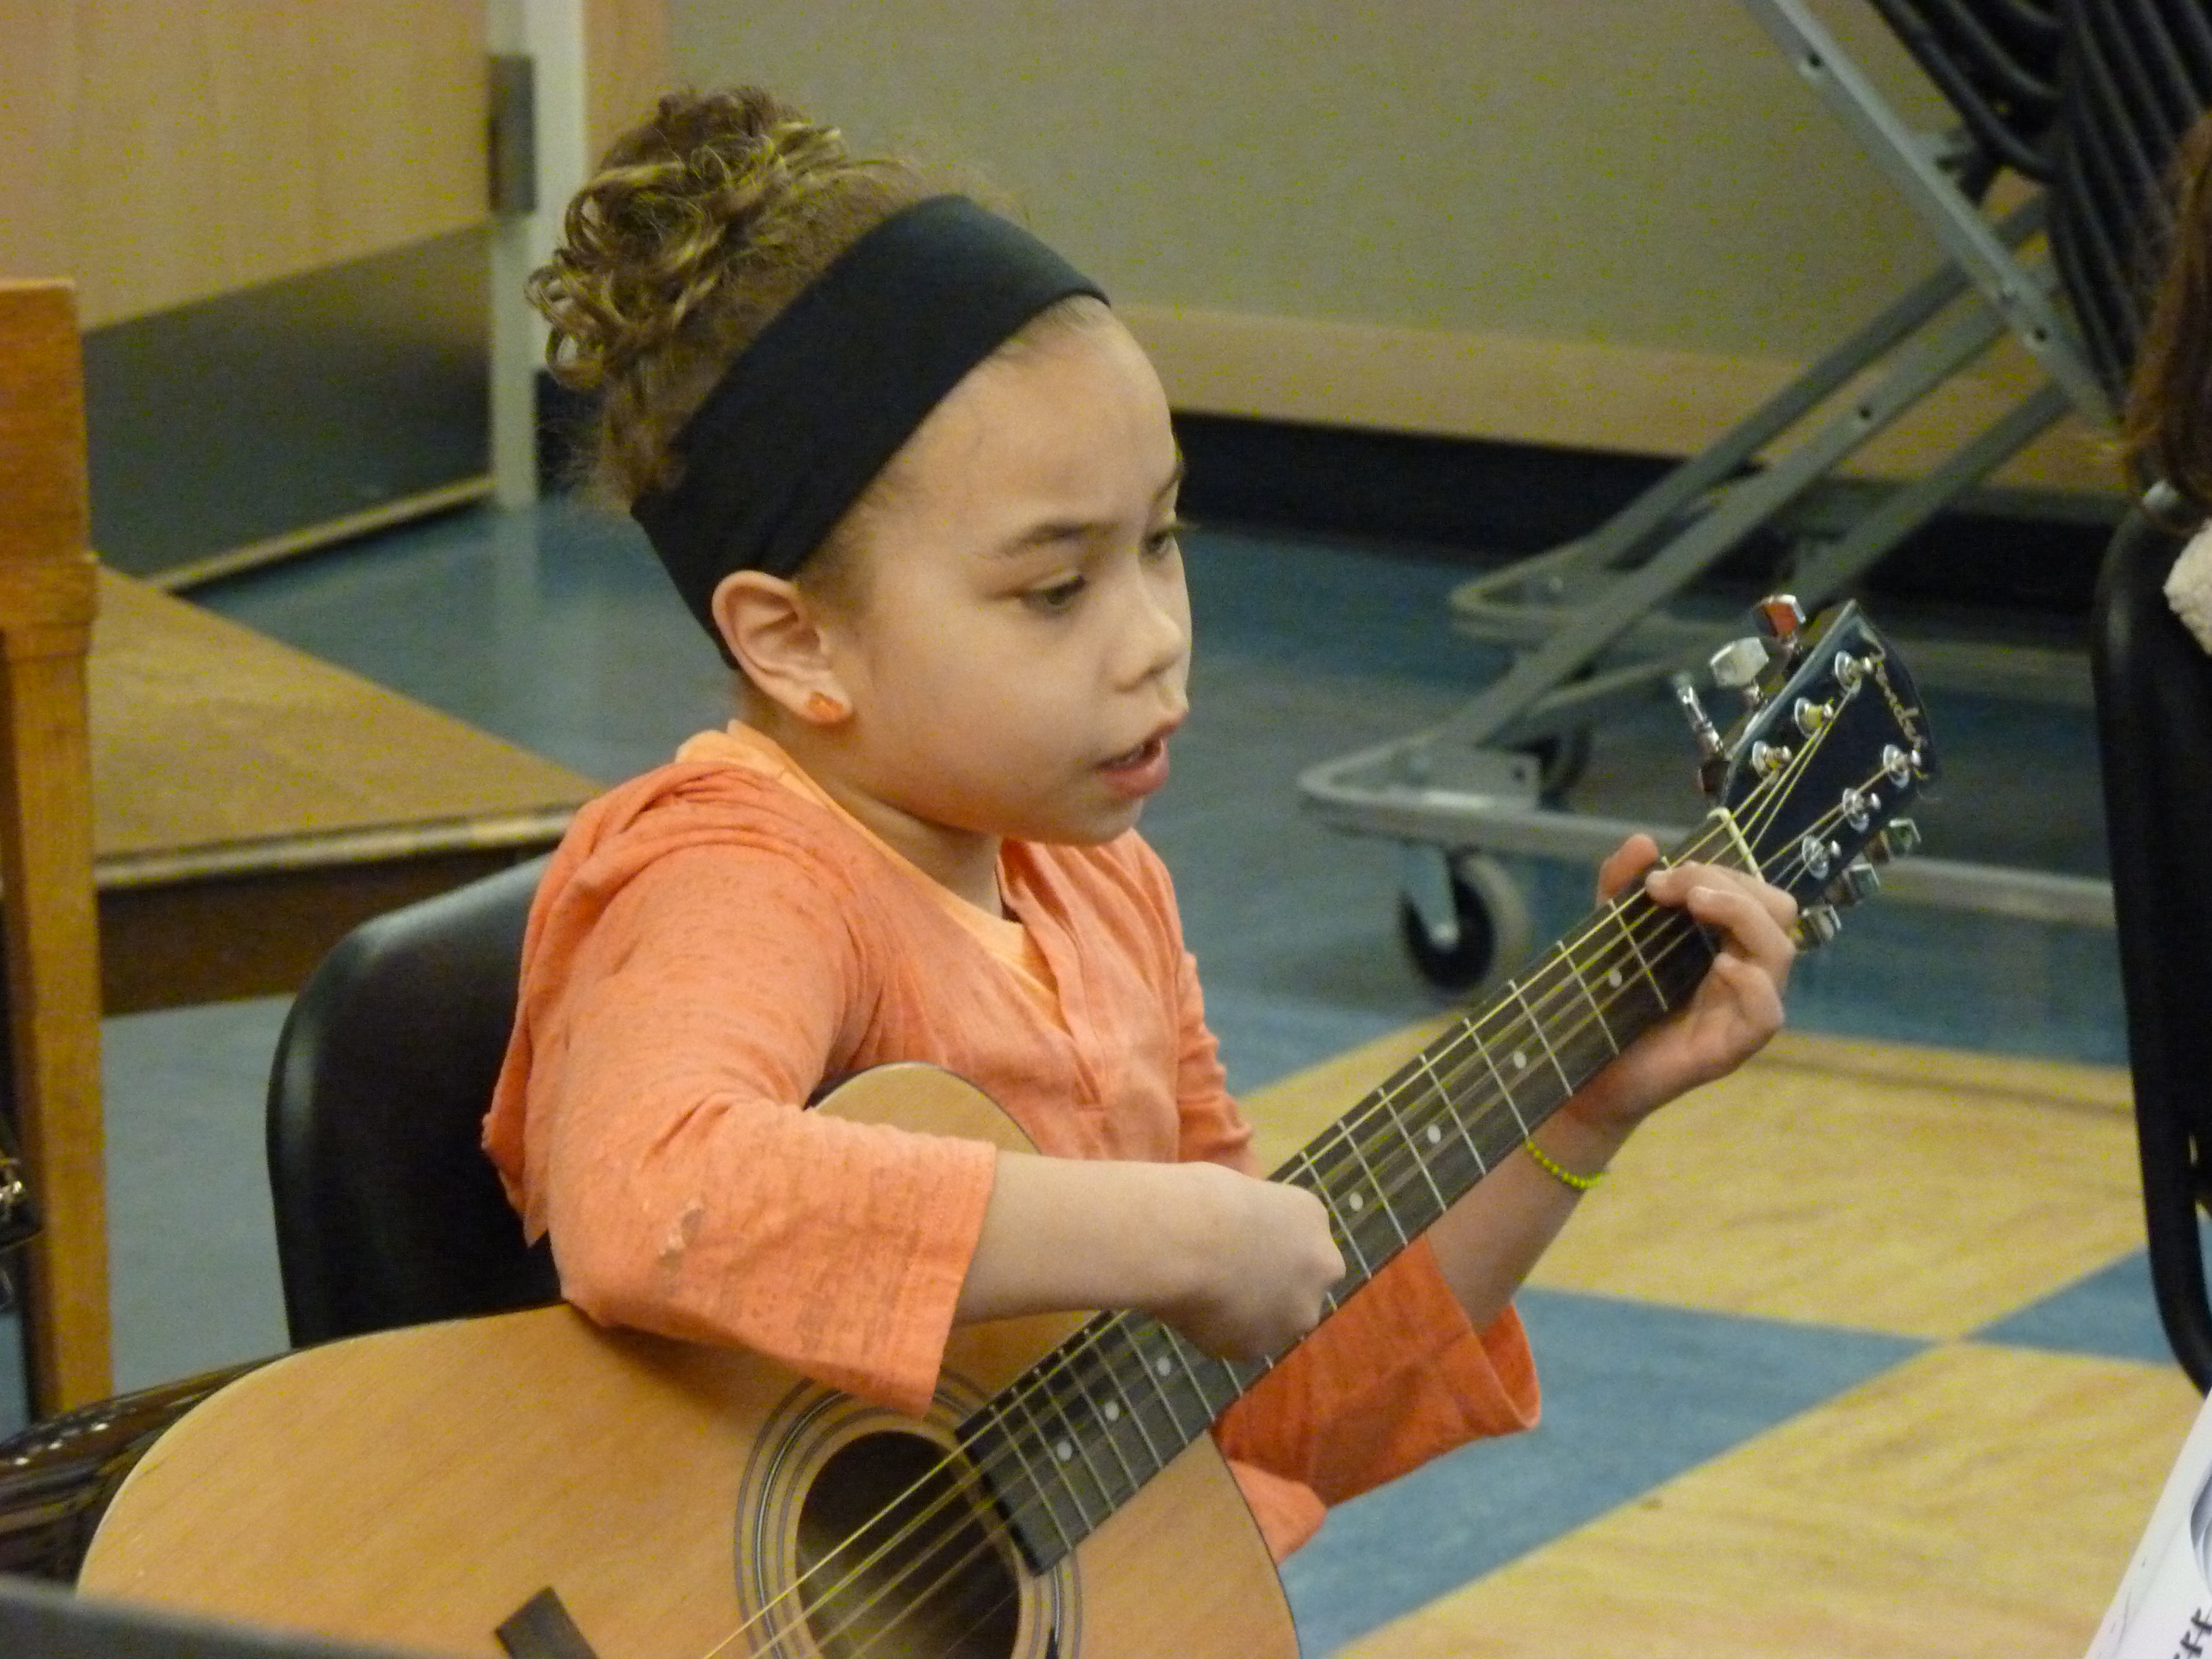 Gastineau Elementary School student Sophia Lundeman sings and plays guitar during a music class led by Patrick Murphy (Photo by Ed Schoenfeld, CoastAlaska News)